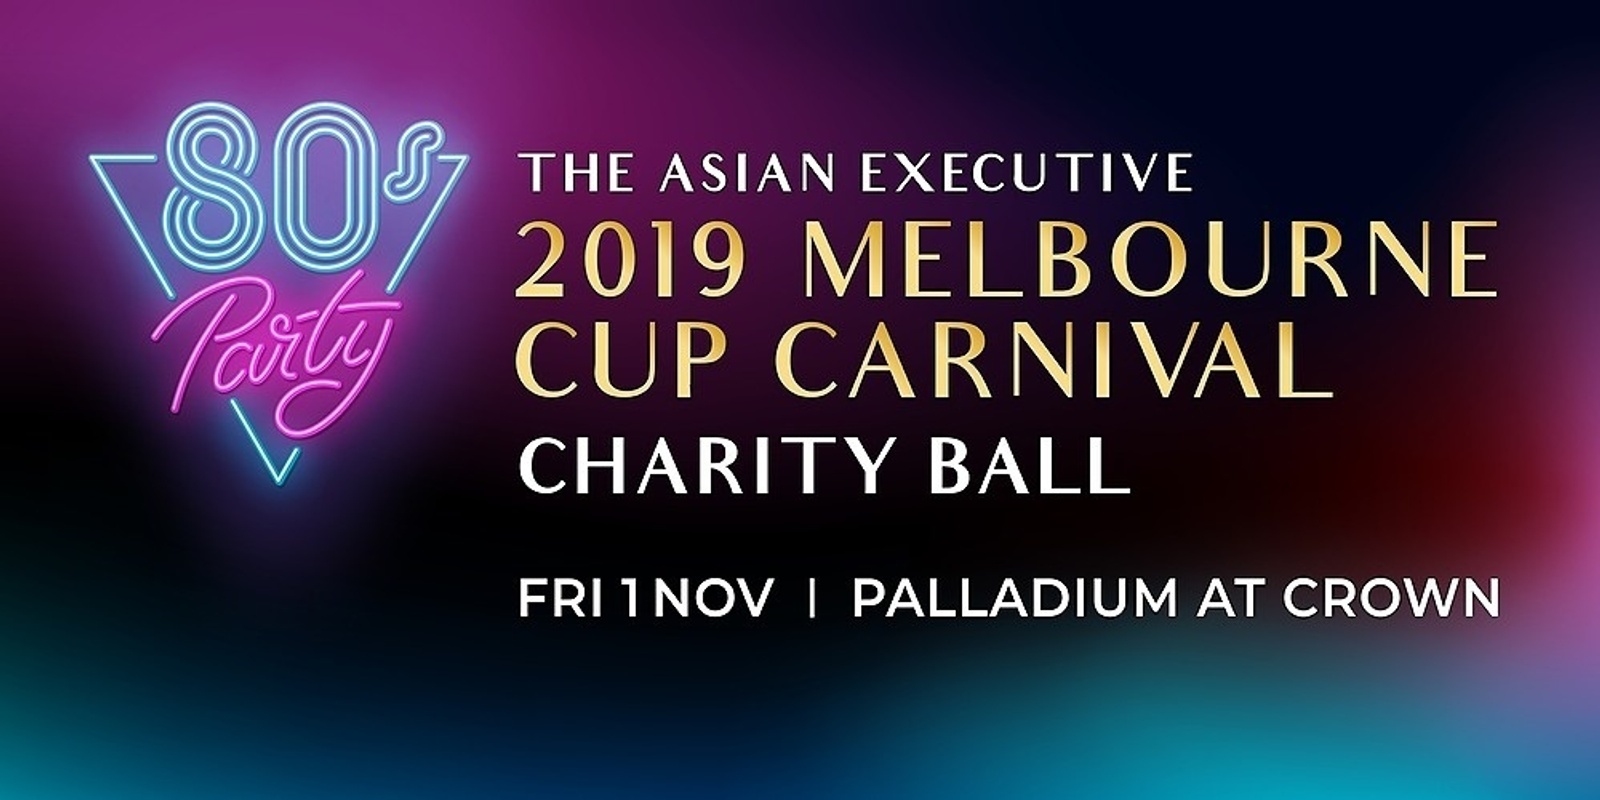 Banner image for The Asian Executive 2019 Melbourne Cup Carnival Charity Ball